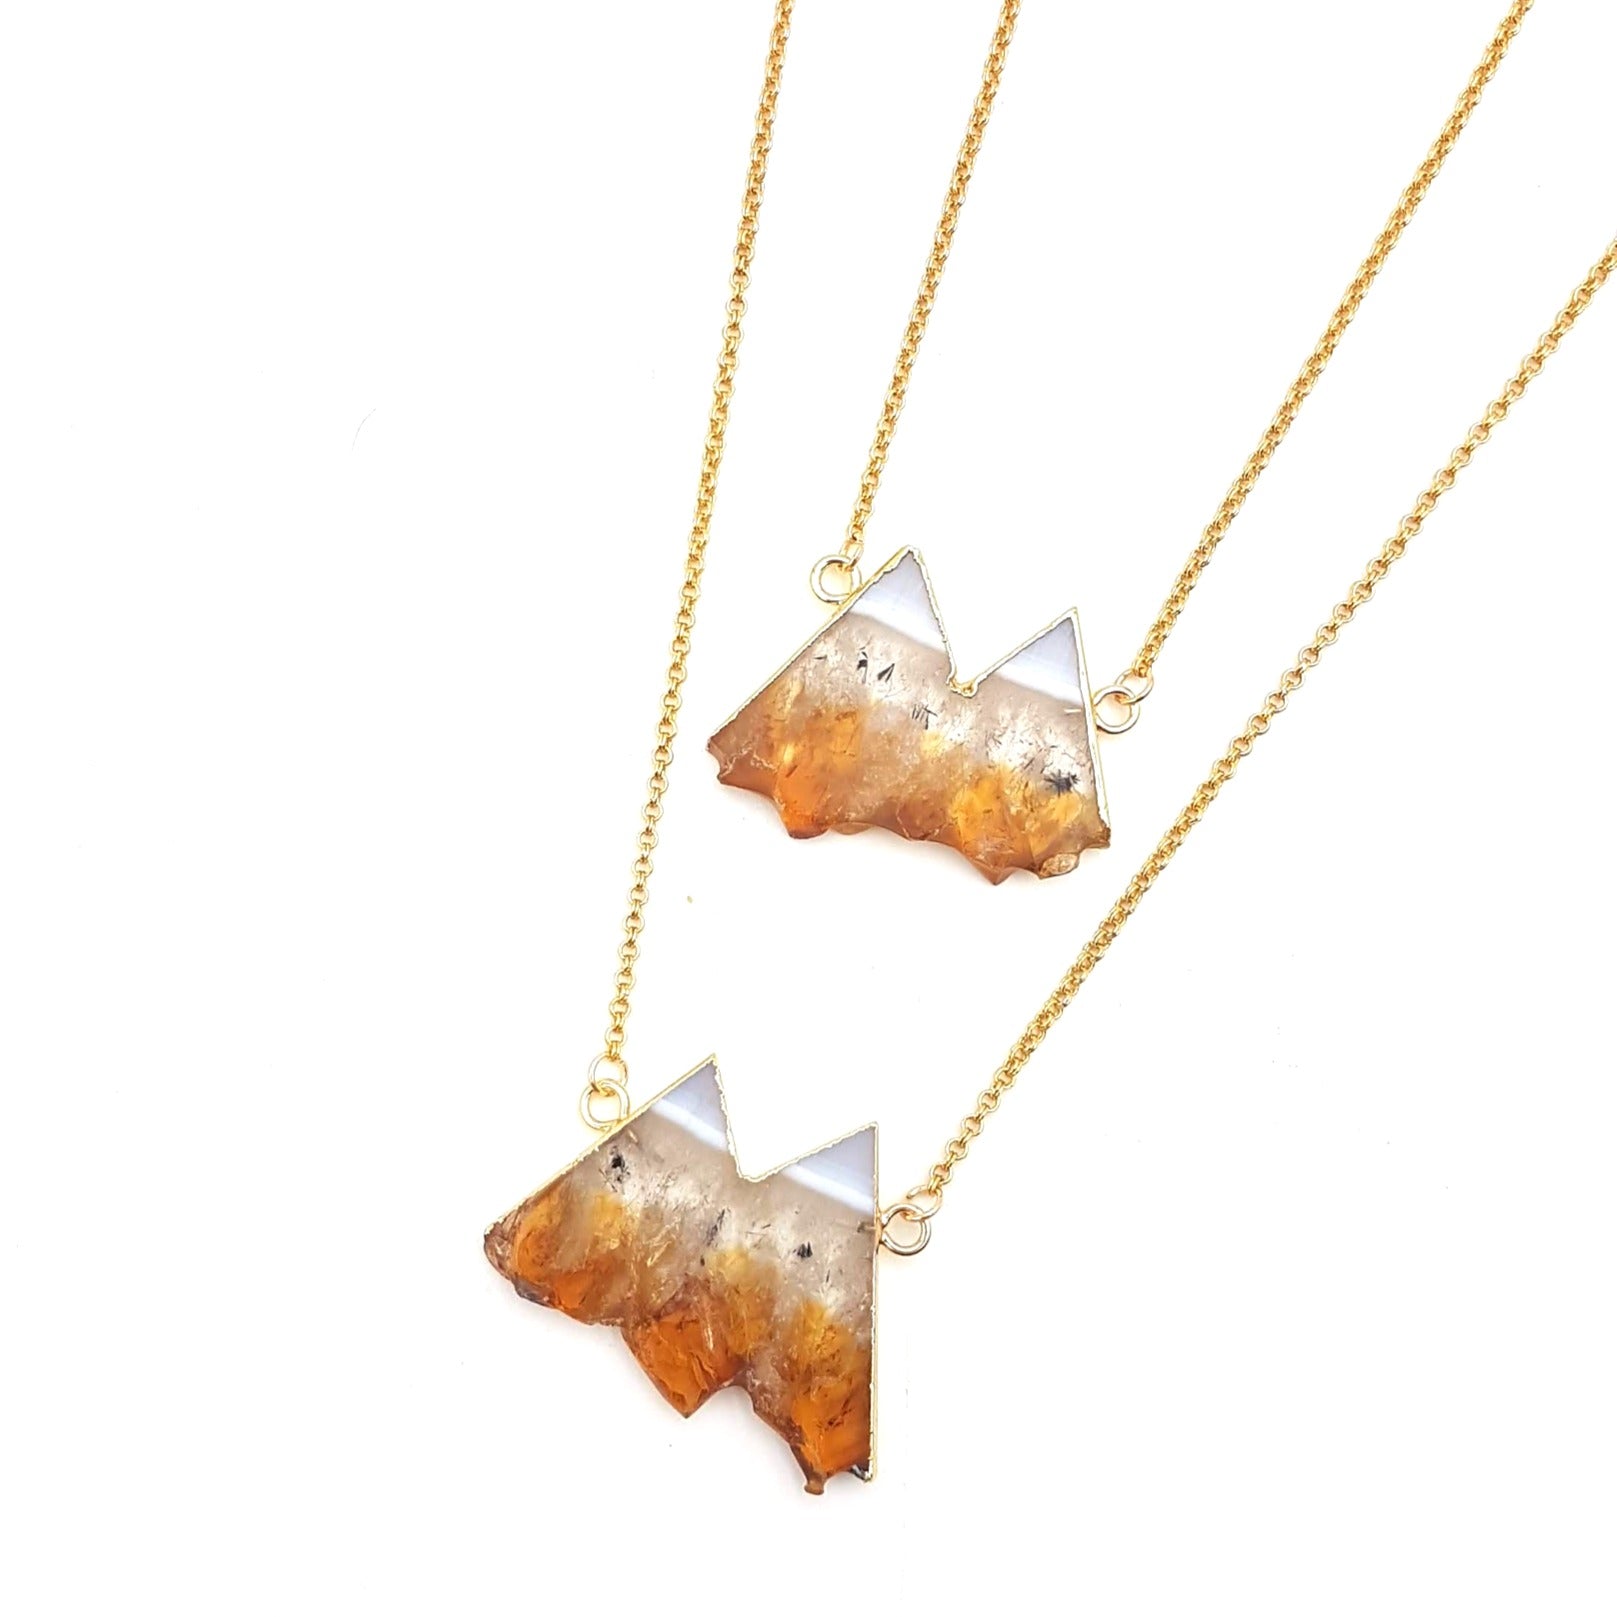 Take Me To The Mountains Necklace - Citrine